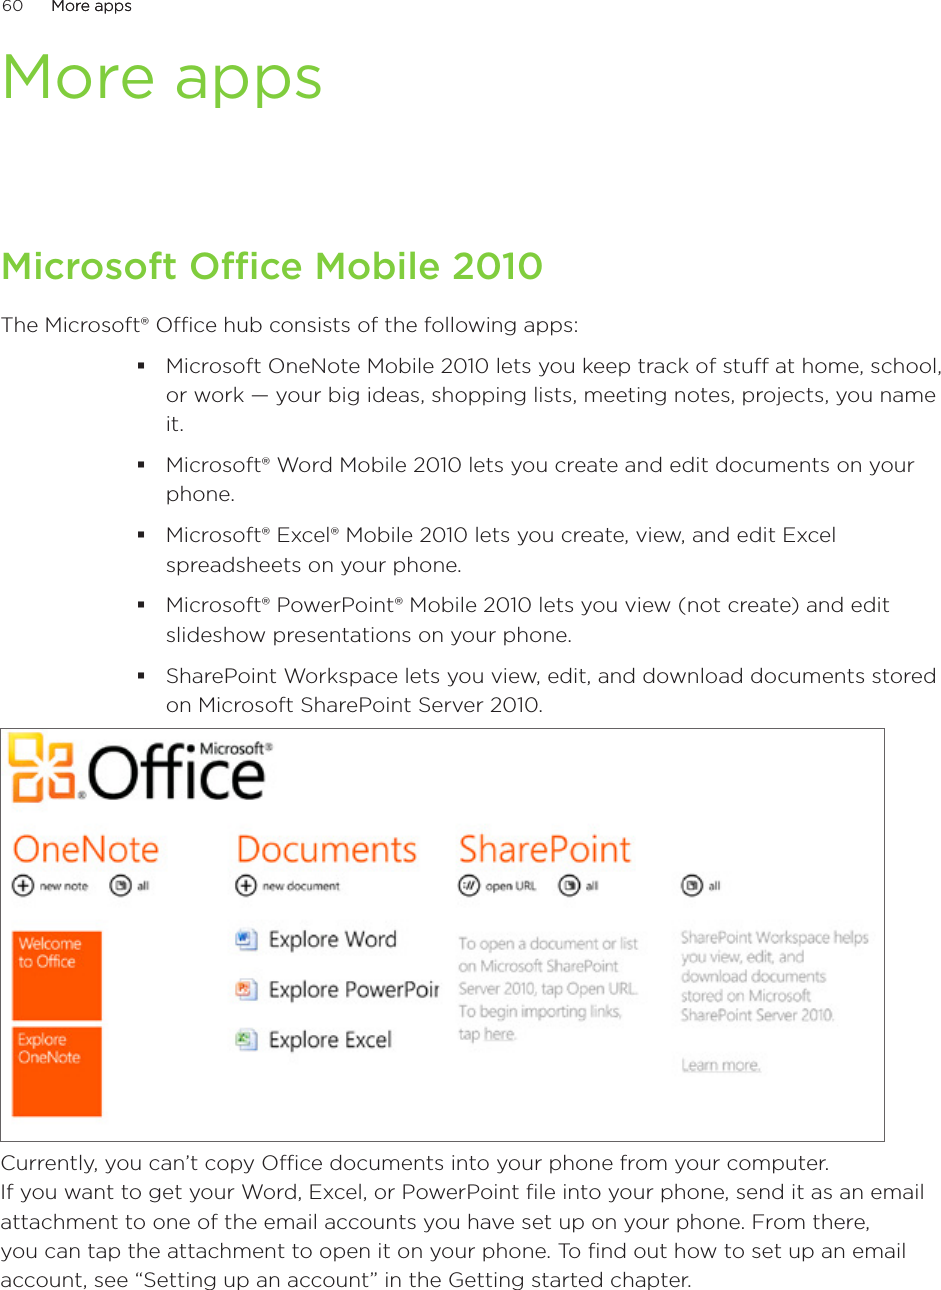 60      More appsMore apps      More appsMicrosoft Office Mobile 2010The Microsoft® Office hub consists of the following apps:Microsoft OneNote Mobile 2010 lets you keep track of stuff at home, school, or work — your big ideas, shopping lists, meeting notes, projects, you name it.Microsoft® Word Mobile 2010 lets you create and edit documents on your phone.Microsoft® Excel® Mobile 2010 lets you create, view, and edit Excel spreadsheets on your phone.Microsoft® PowerPoint® Mobile 2010 lets you view (not create) and edit slideshow presentations on your phone.SharePoint Workspace lets you view, edit, and download documents stored on Microsoft SharePoint Server 2010.Currently, you can’t copy Office documents into your phone from your computer.  If you want to get your Word, Excel, or PowerPoint file into your phone, send it as an email attachment to one of the email accounts you have set up on your phone. From there, you can tap the attachment to open it on your phone. To find out how to set up an email account, see “Setting up an account” in the Getting started chapter. 